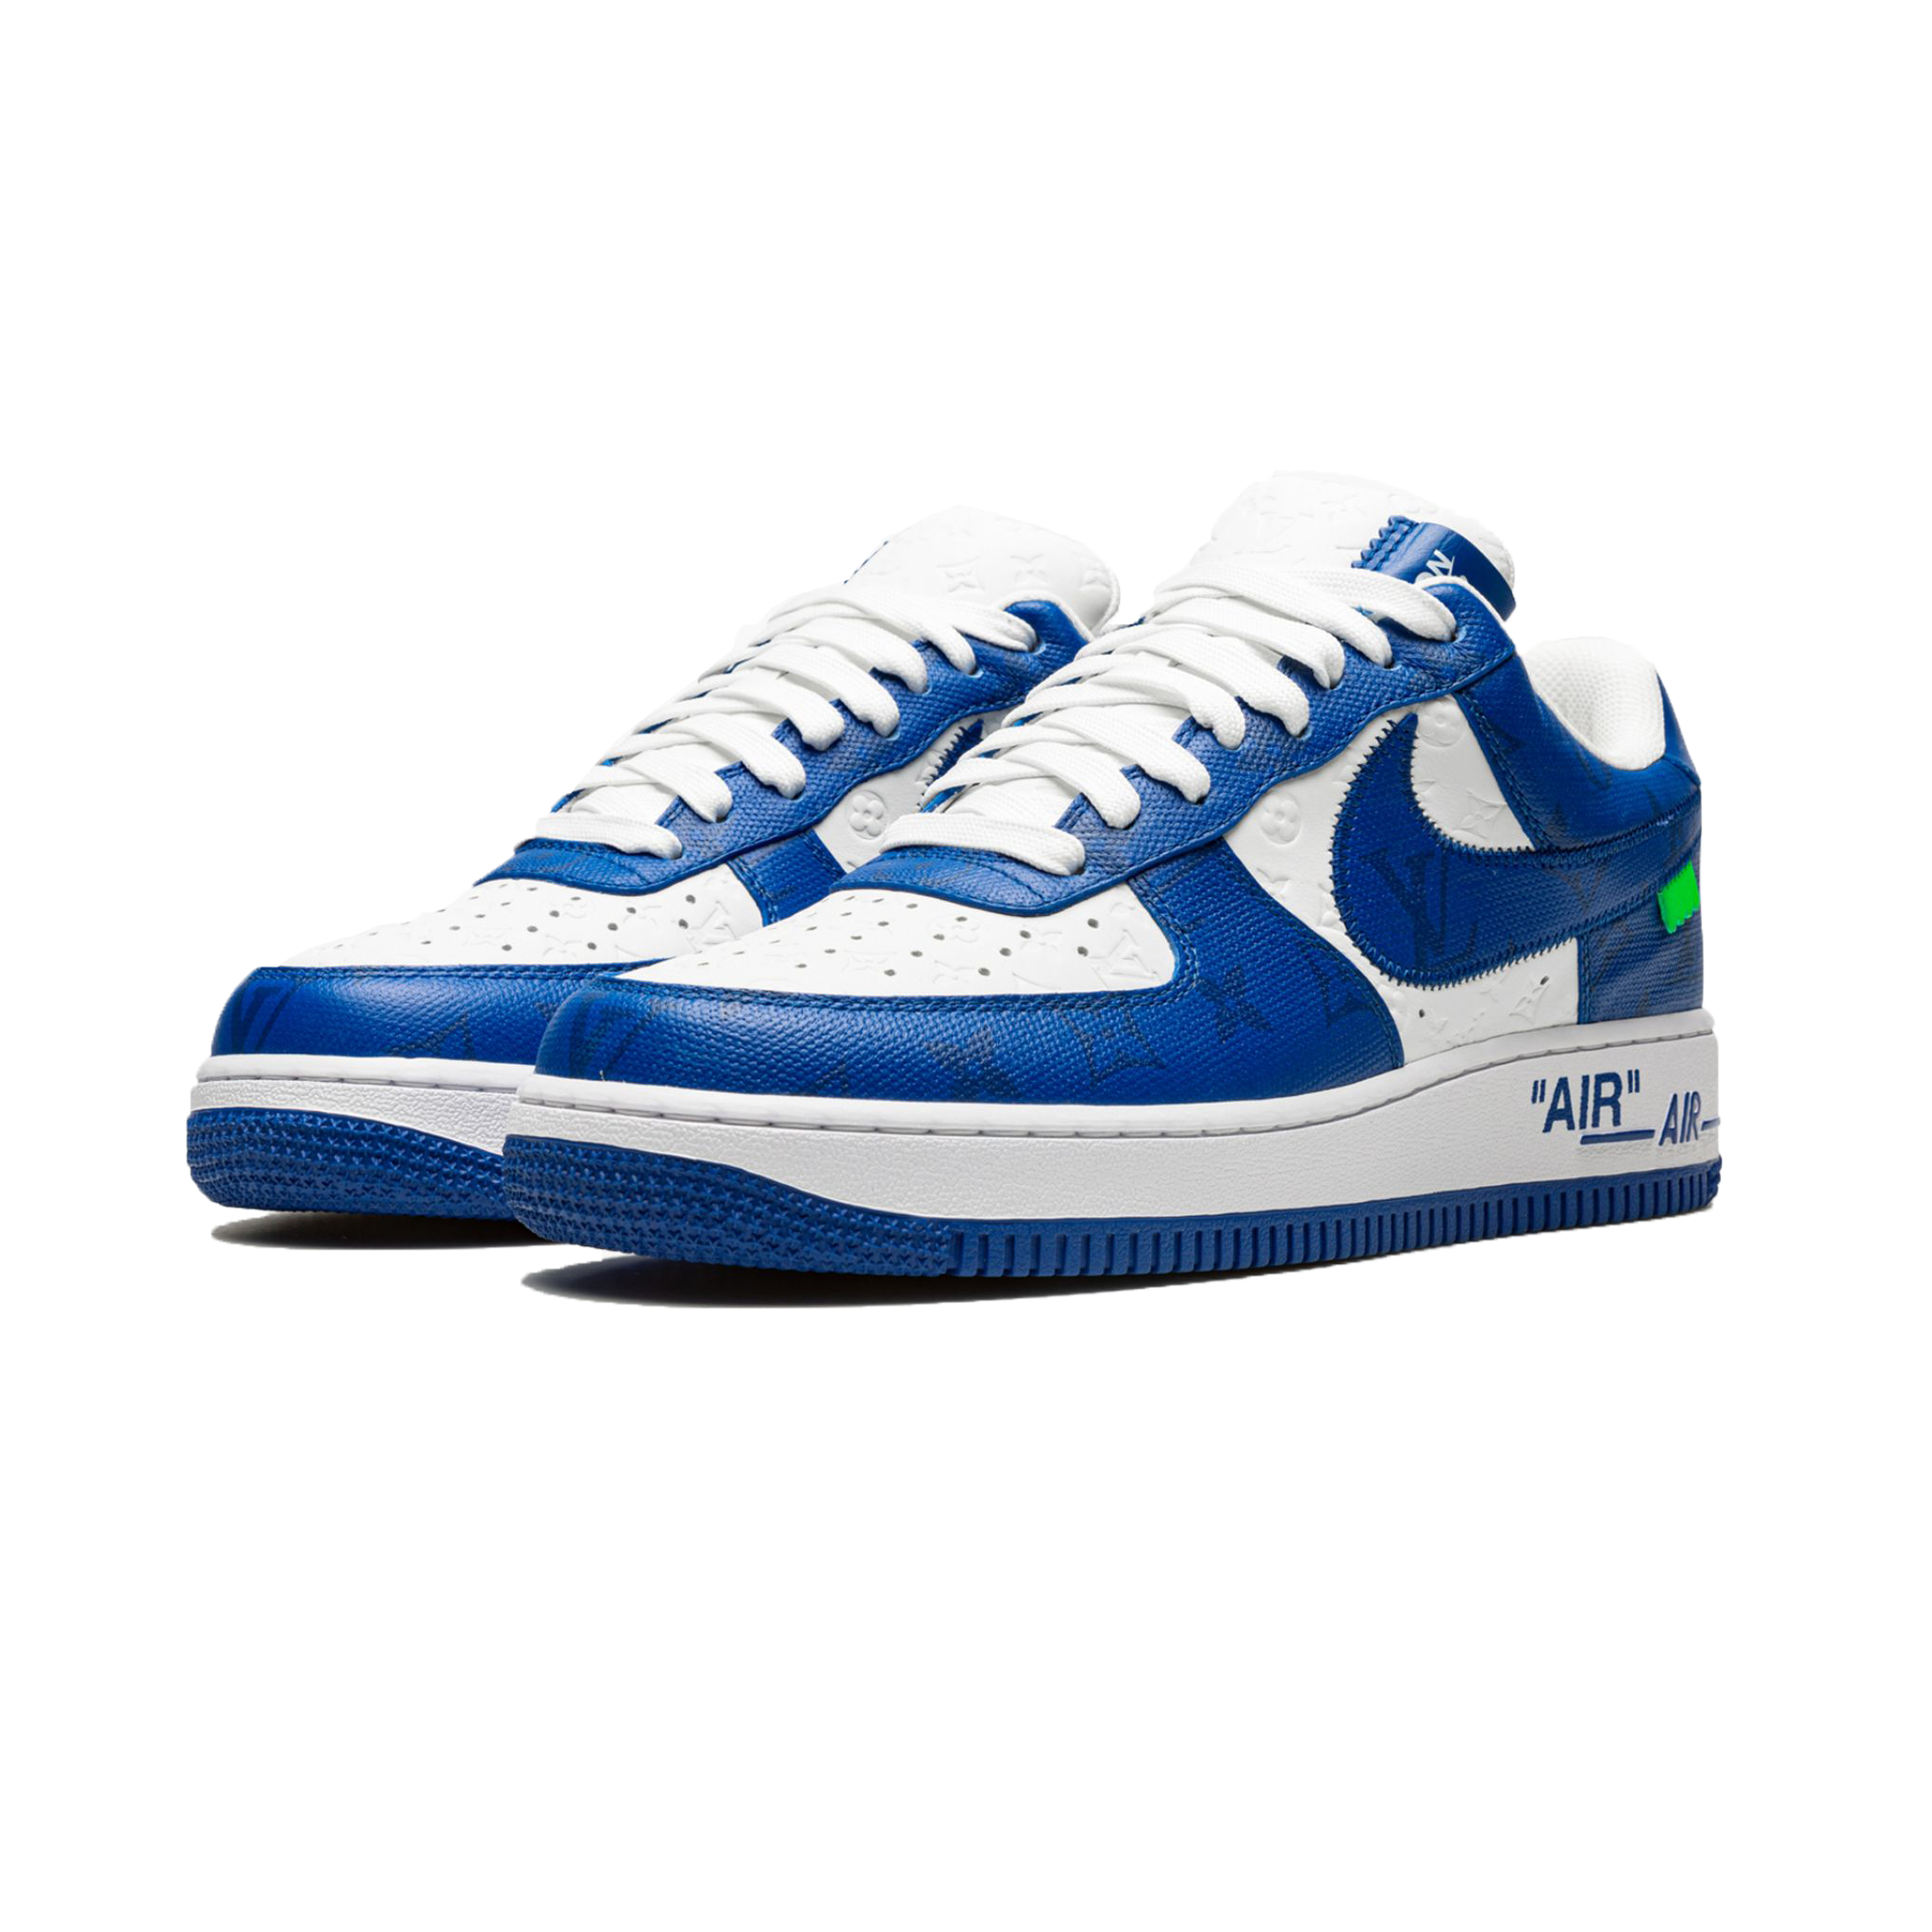 New Nike x Louis Vuitton Air Force 1 Sneakers by V. Abloh in White and Blue